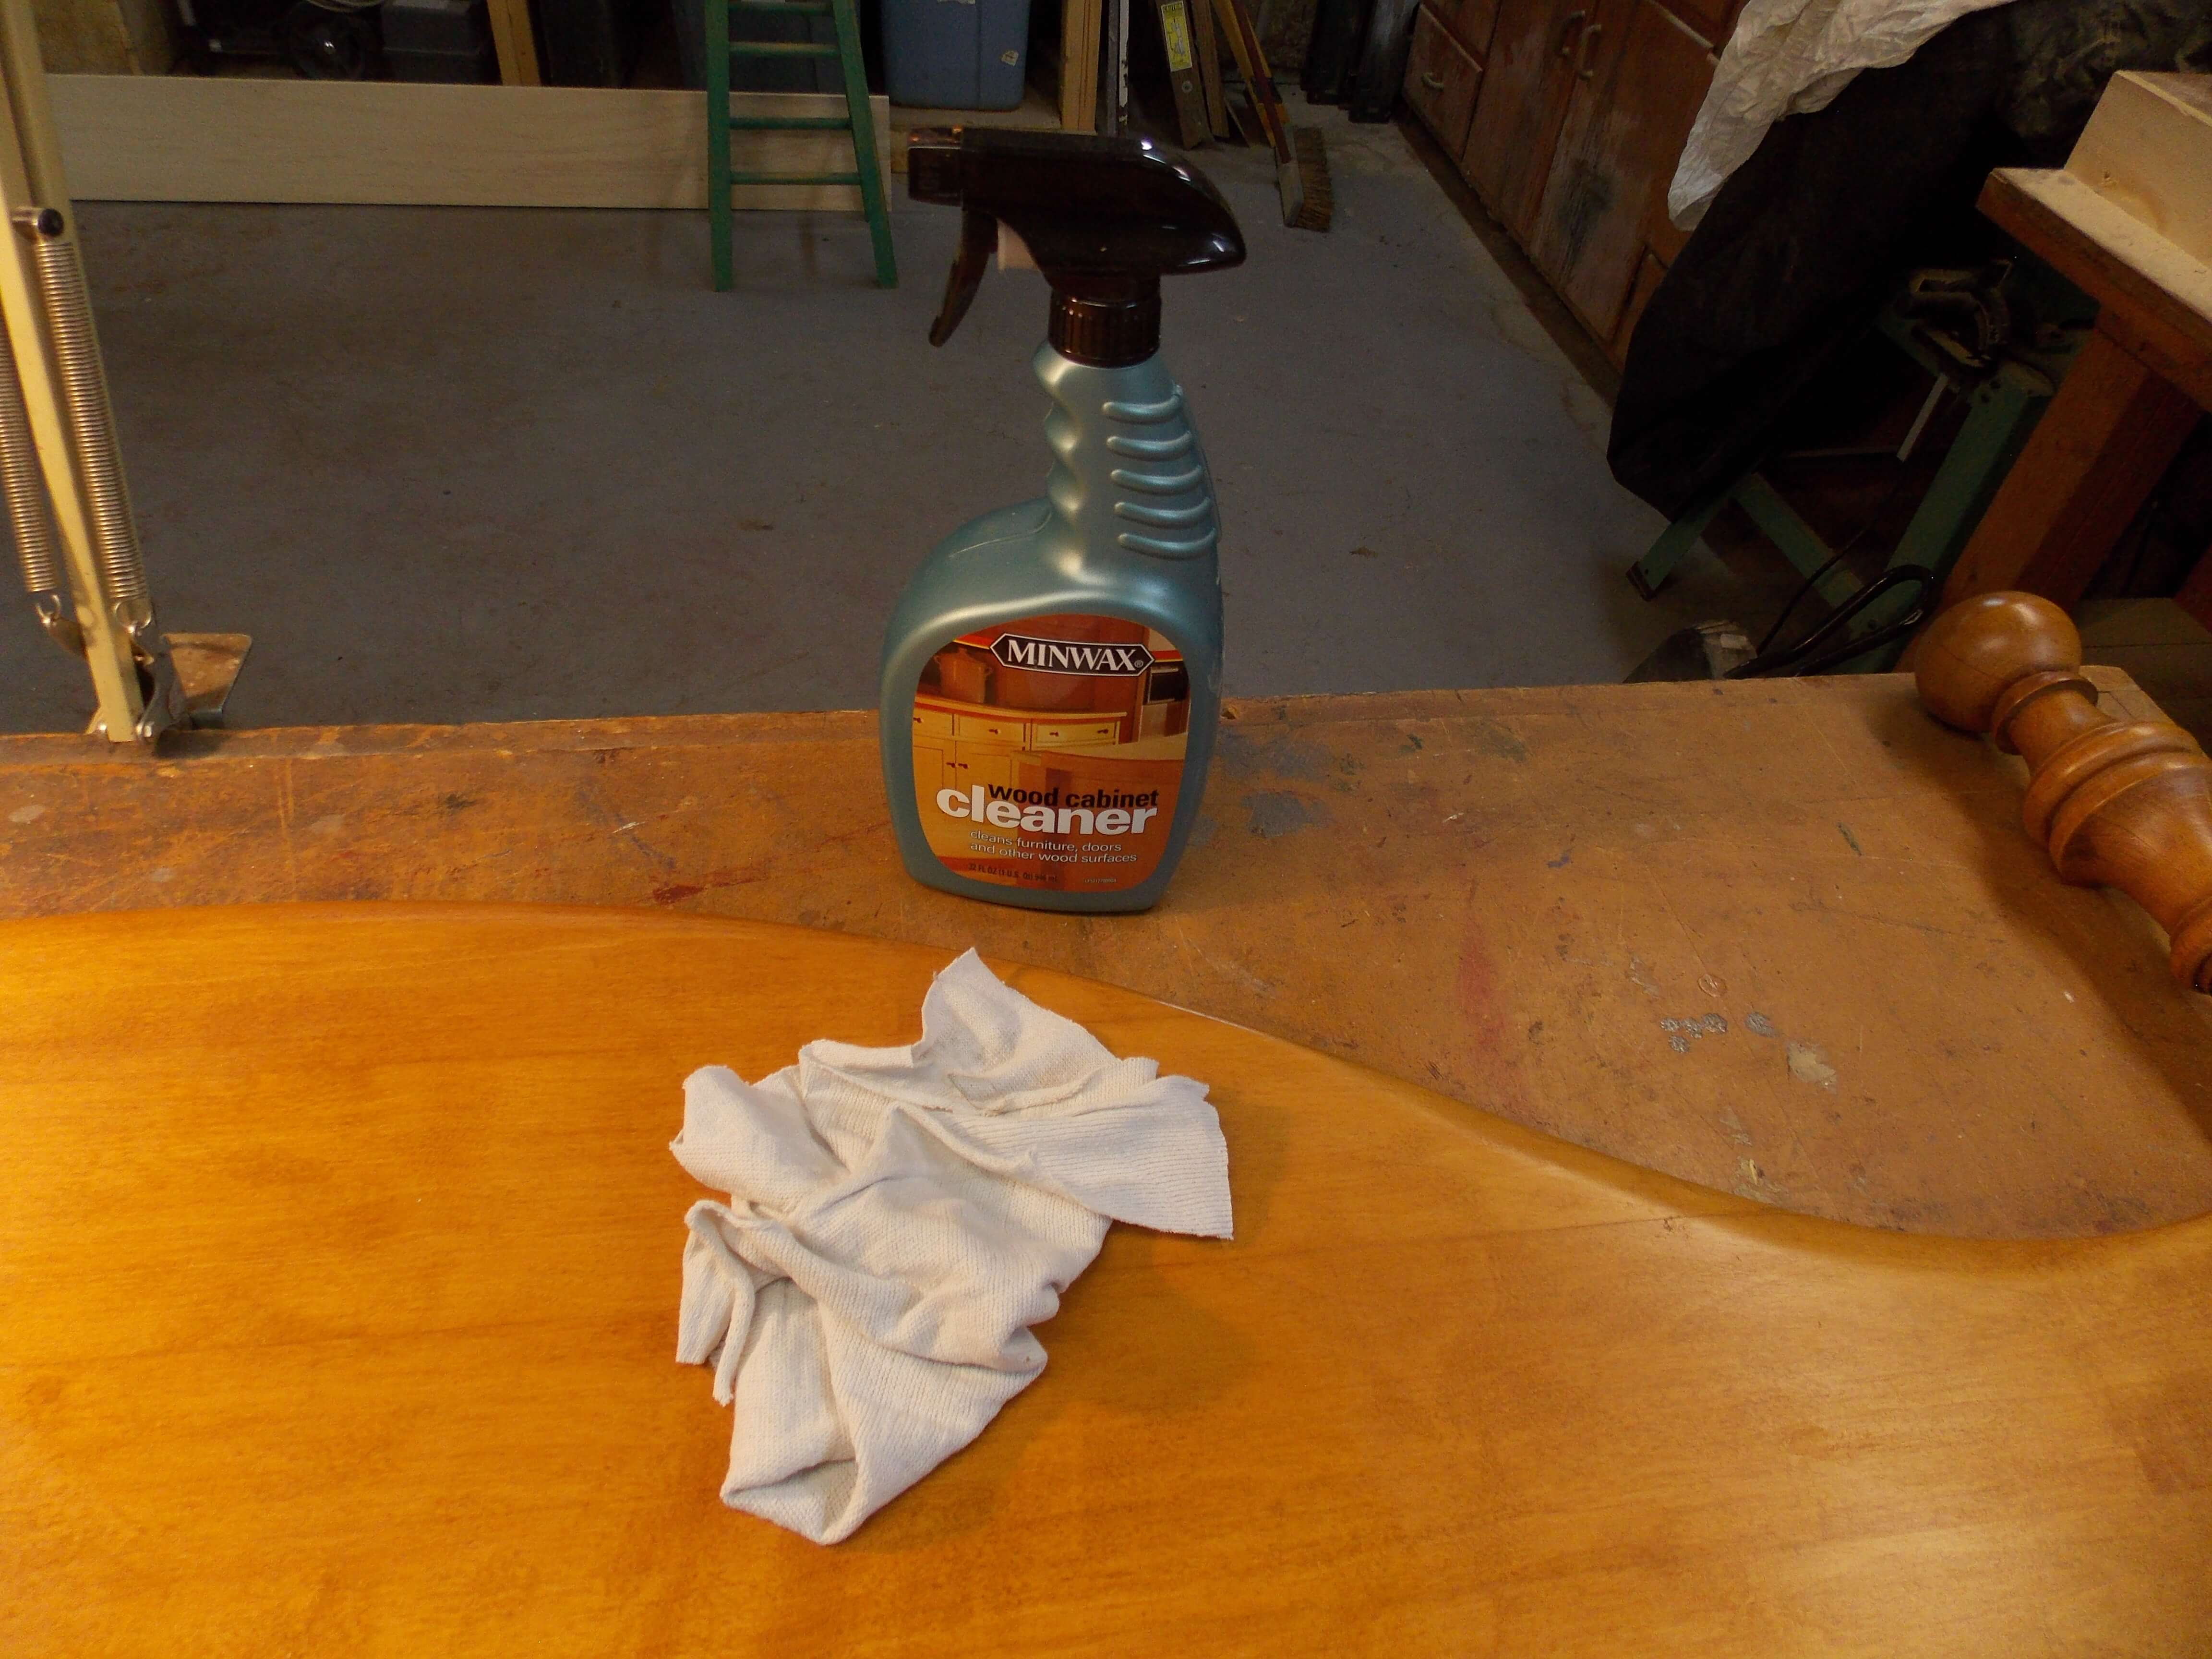 Using Minwax Wood Cabinet Cleaner removes old dirt and grime